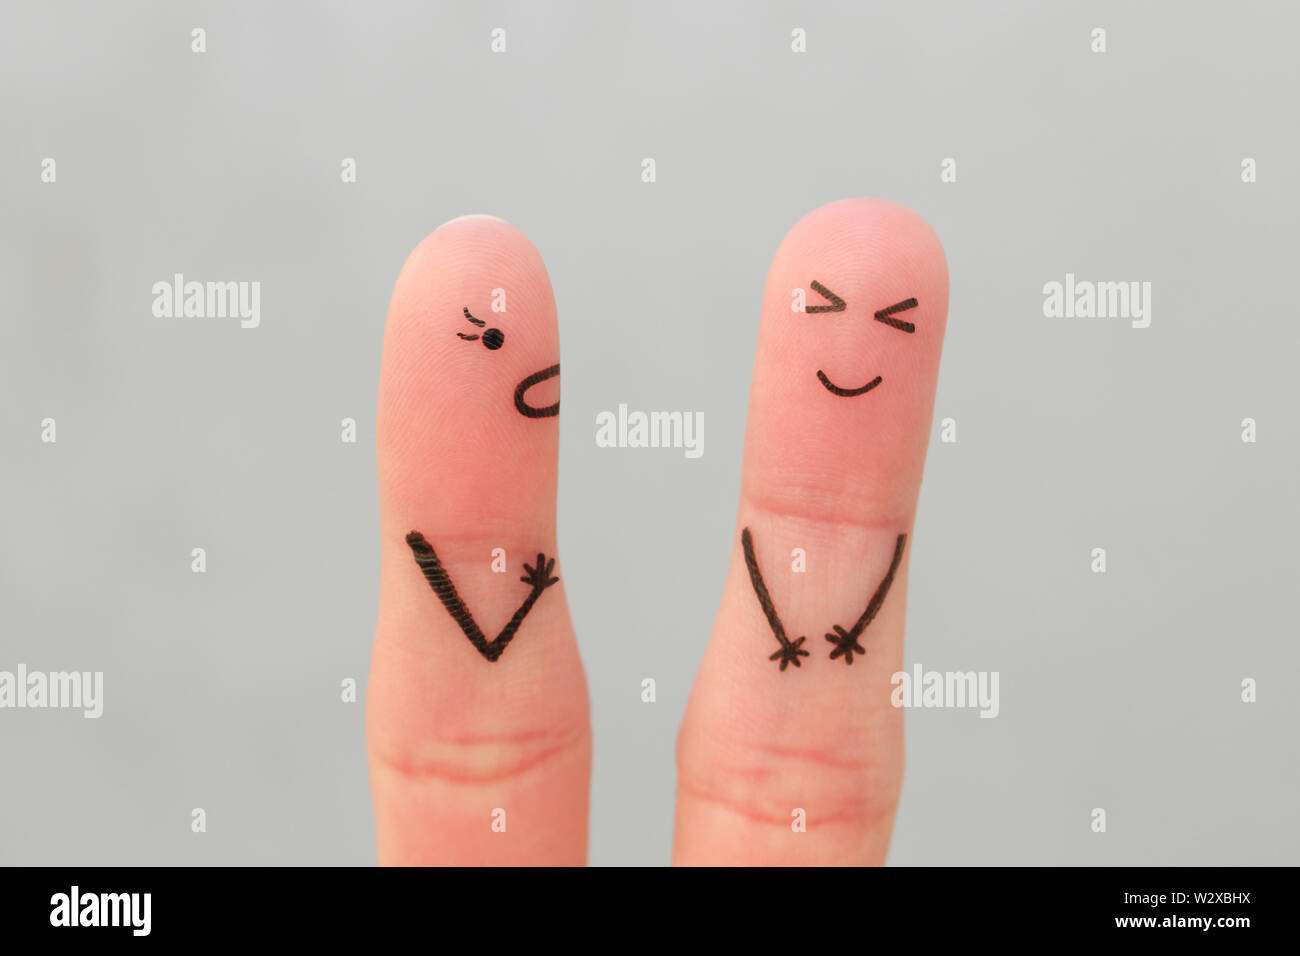 Fingers art of family during quarrel. Concept of wife shouts on husband, man laughs. Stock Photo